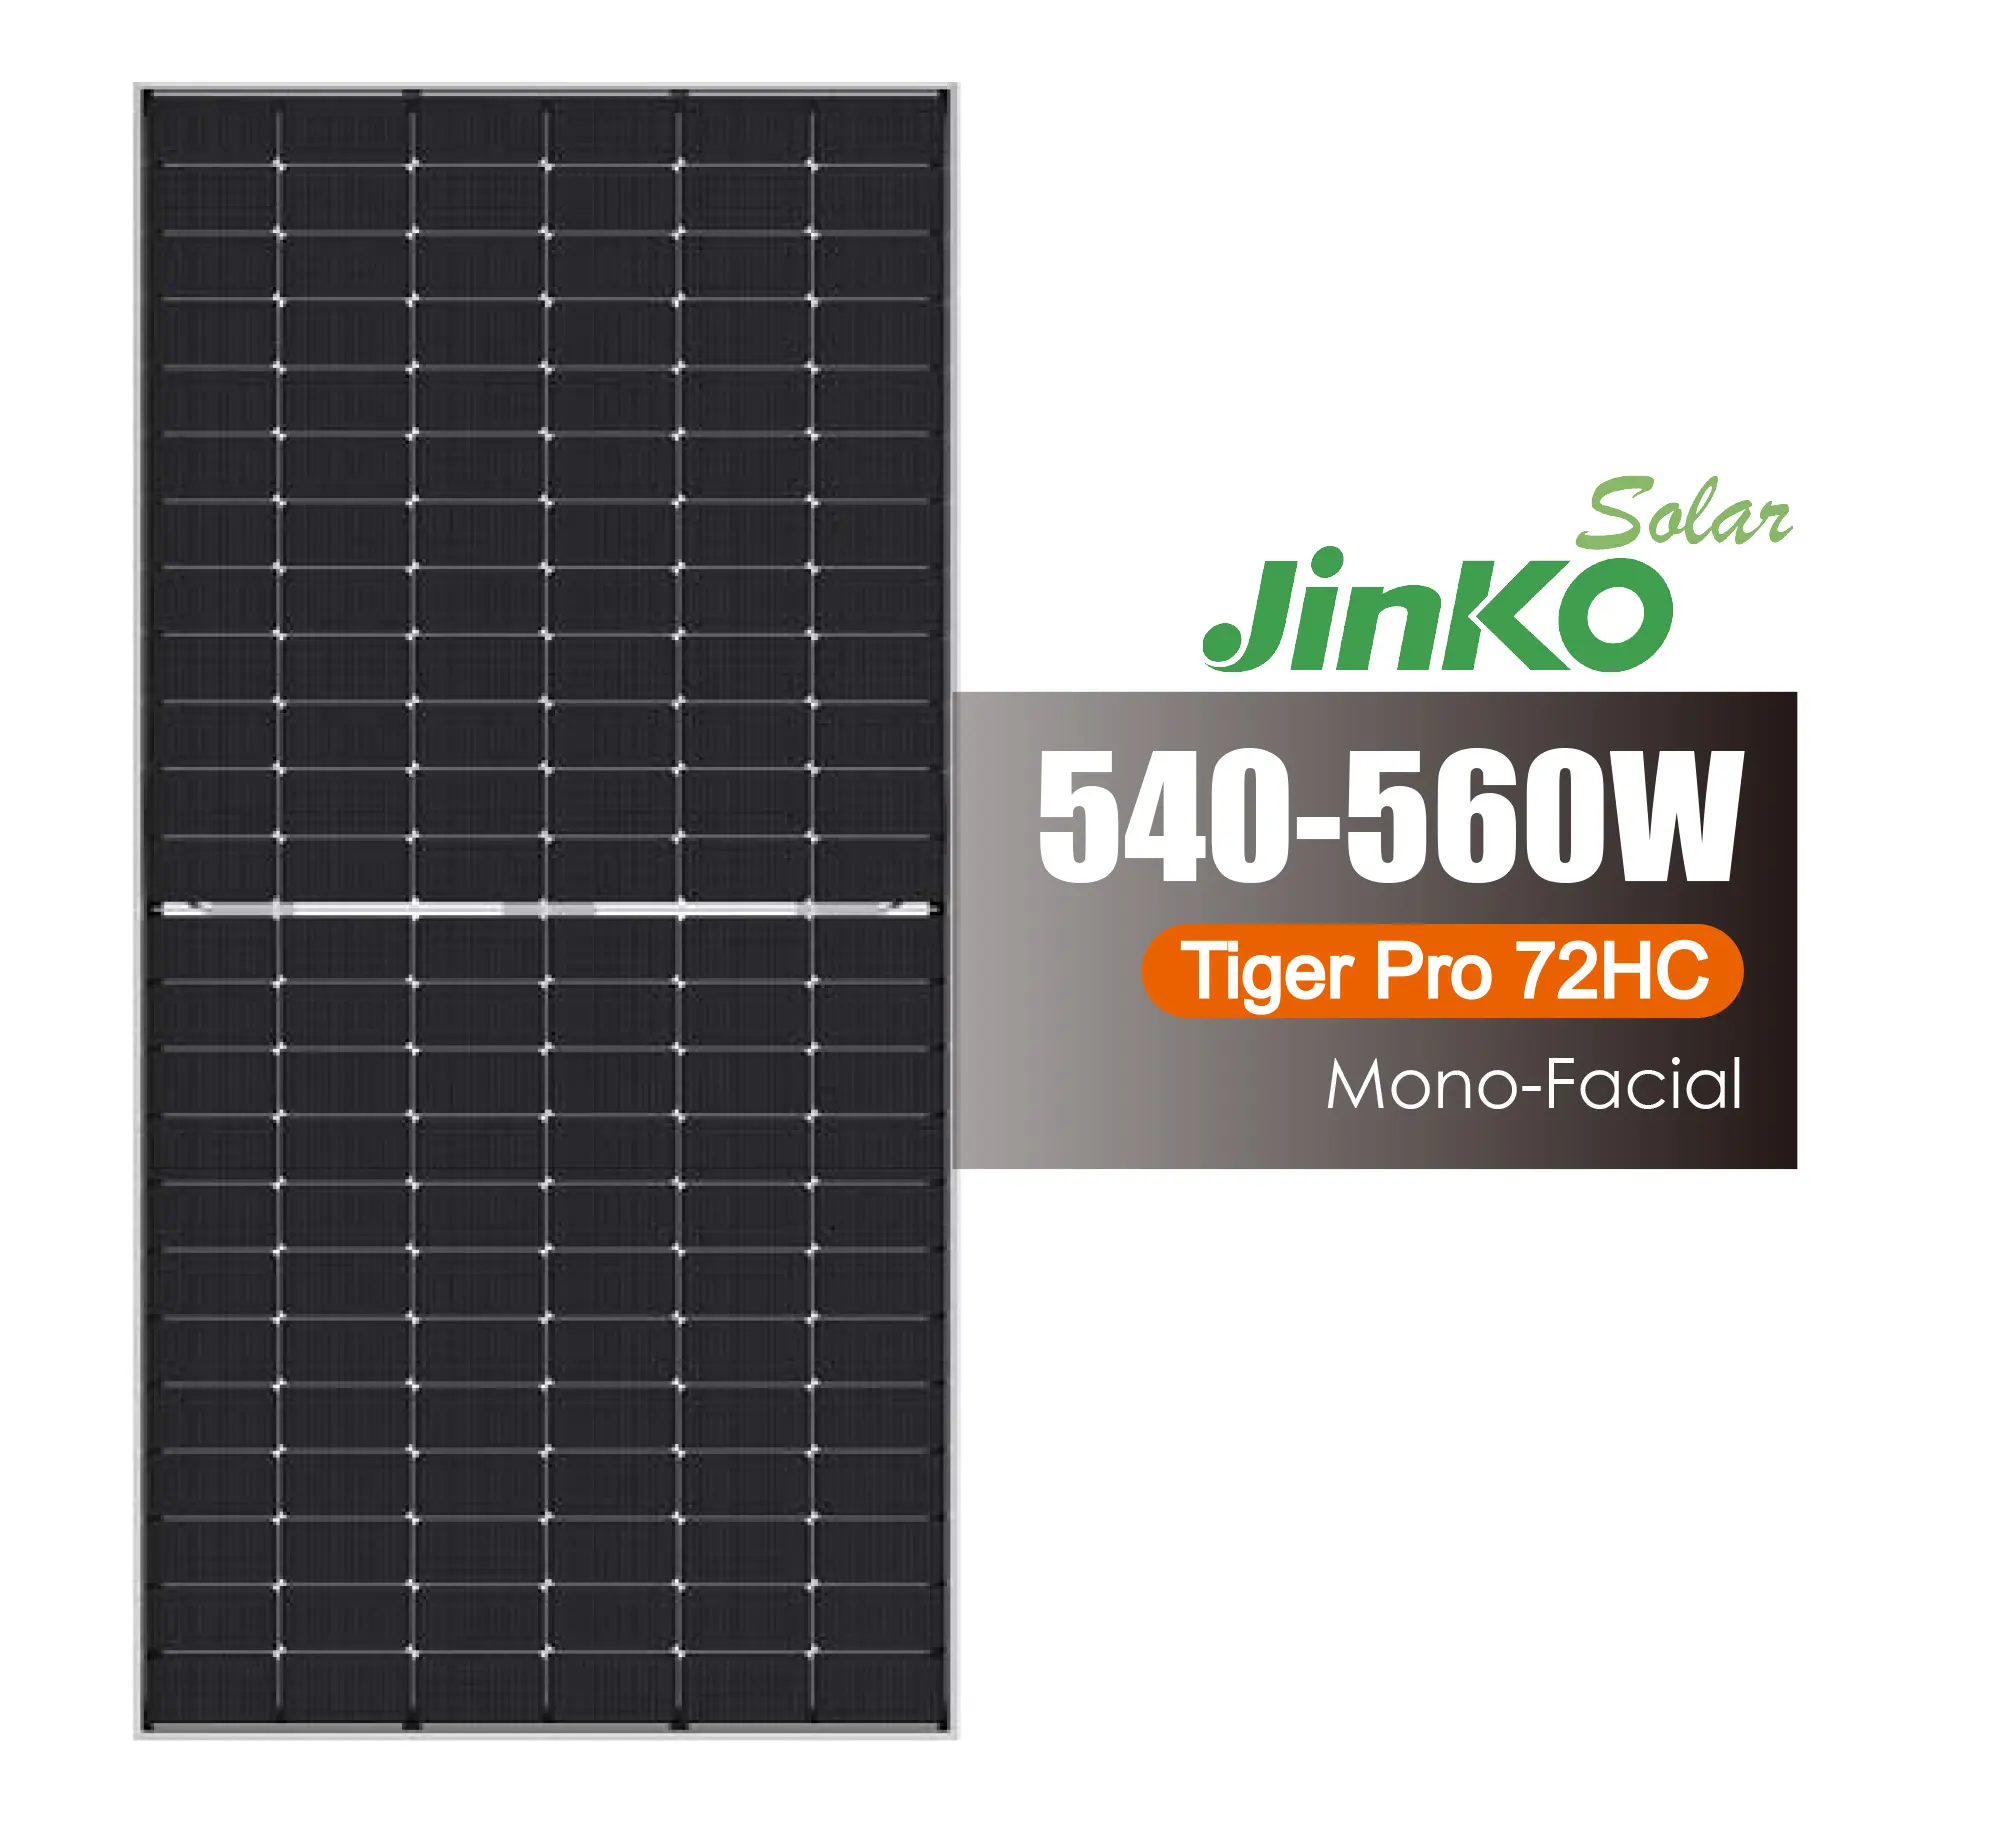 Jinko Top Brand In Stock Solar Panels 182 Cells Mono Tiger Pro 72HC 540-560W Solar Panels For Commerical Use